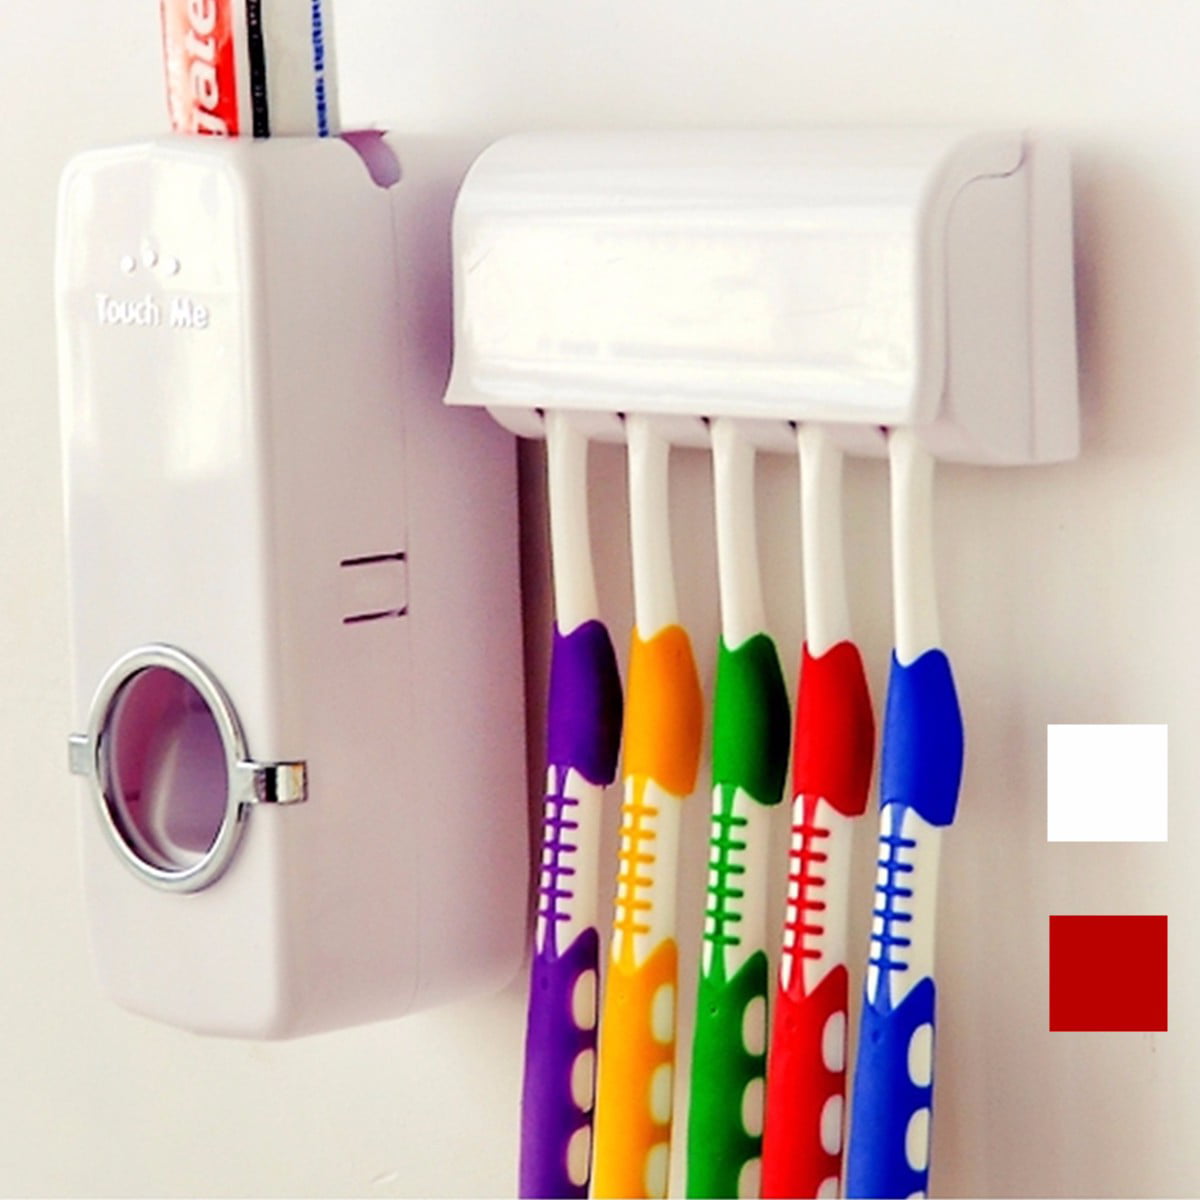 Automatic Toothpaste Dispenser Bathroom Accessories Wall Mount Toothbrush Holder